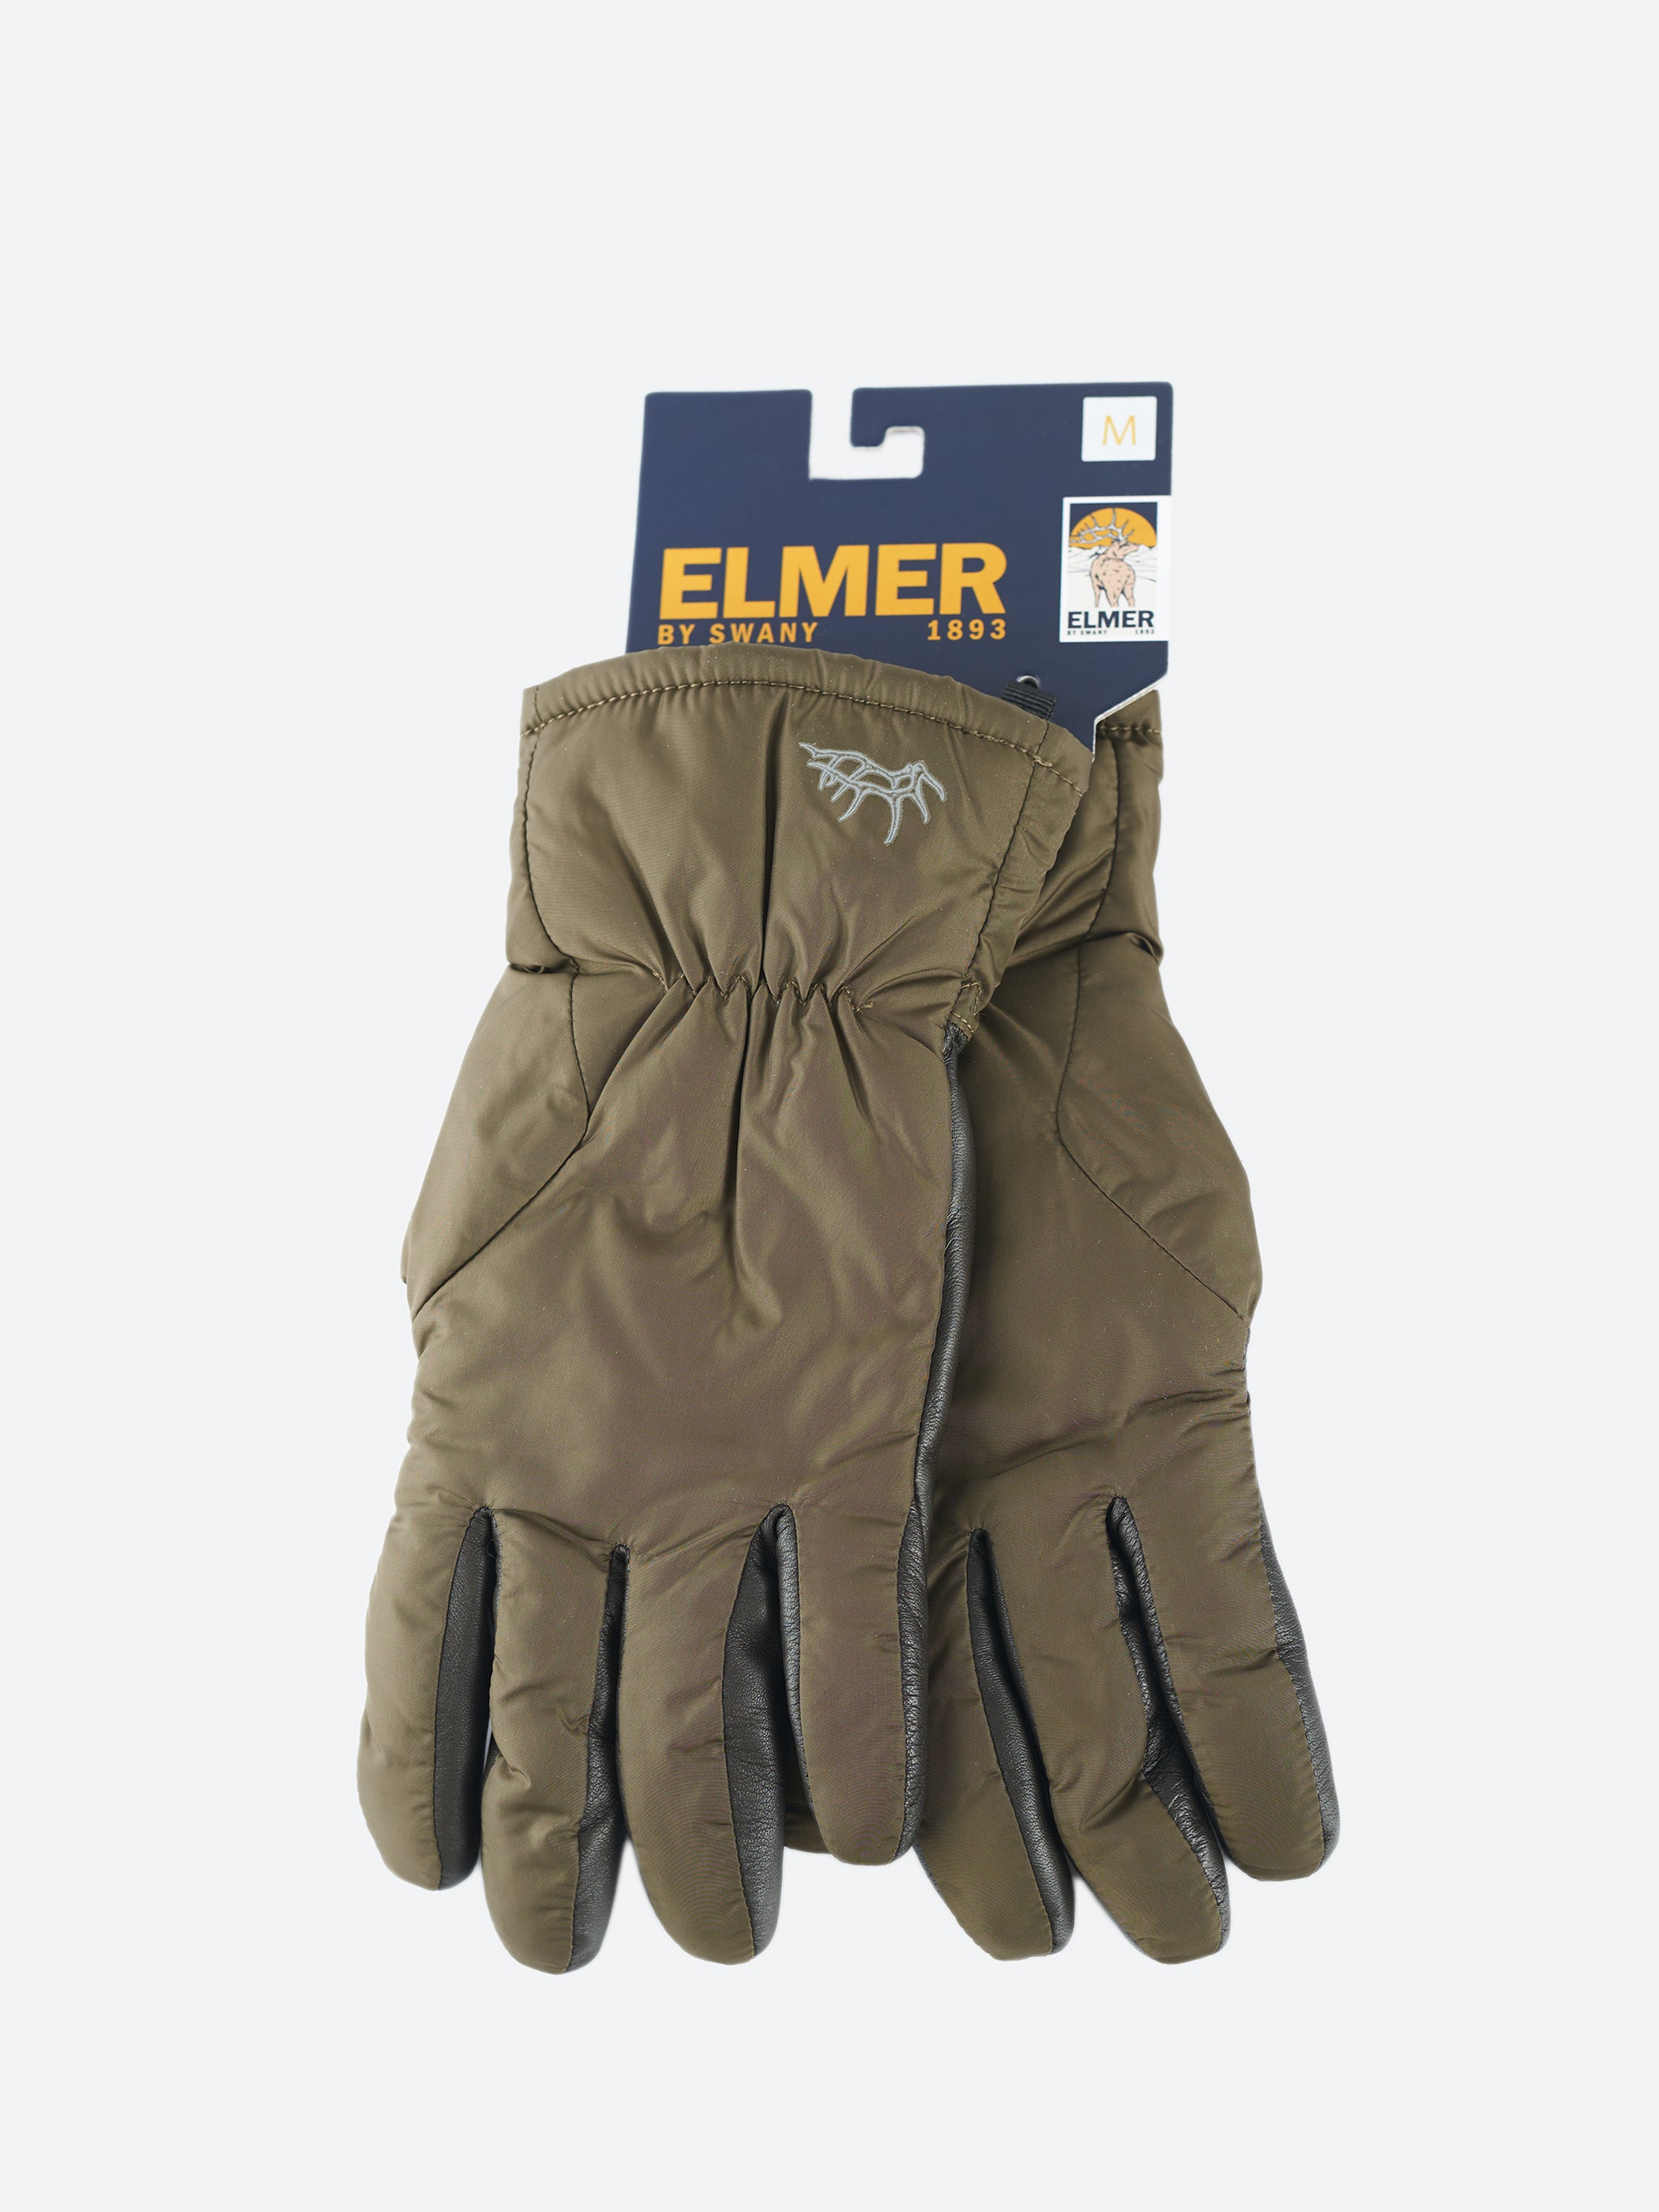 Gore-Tex Lined Glove